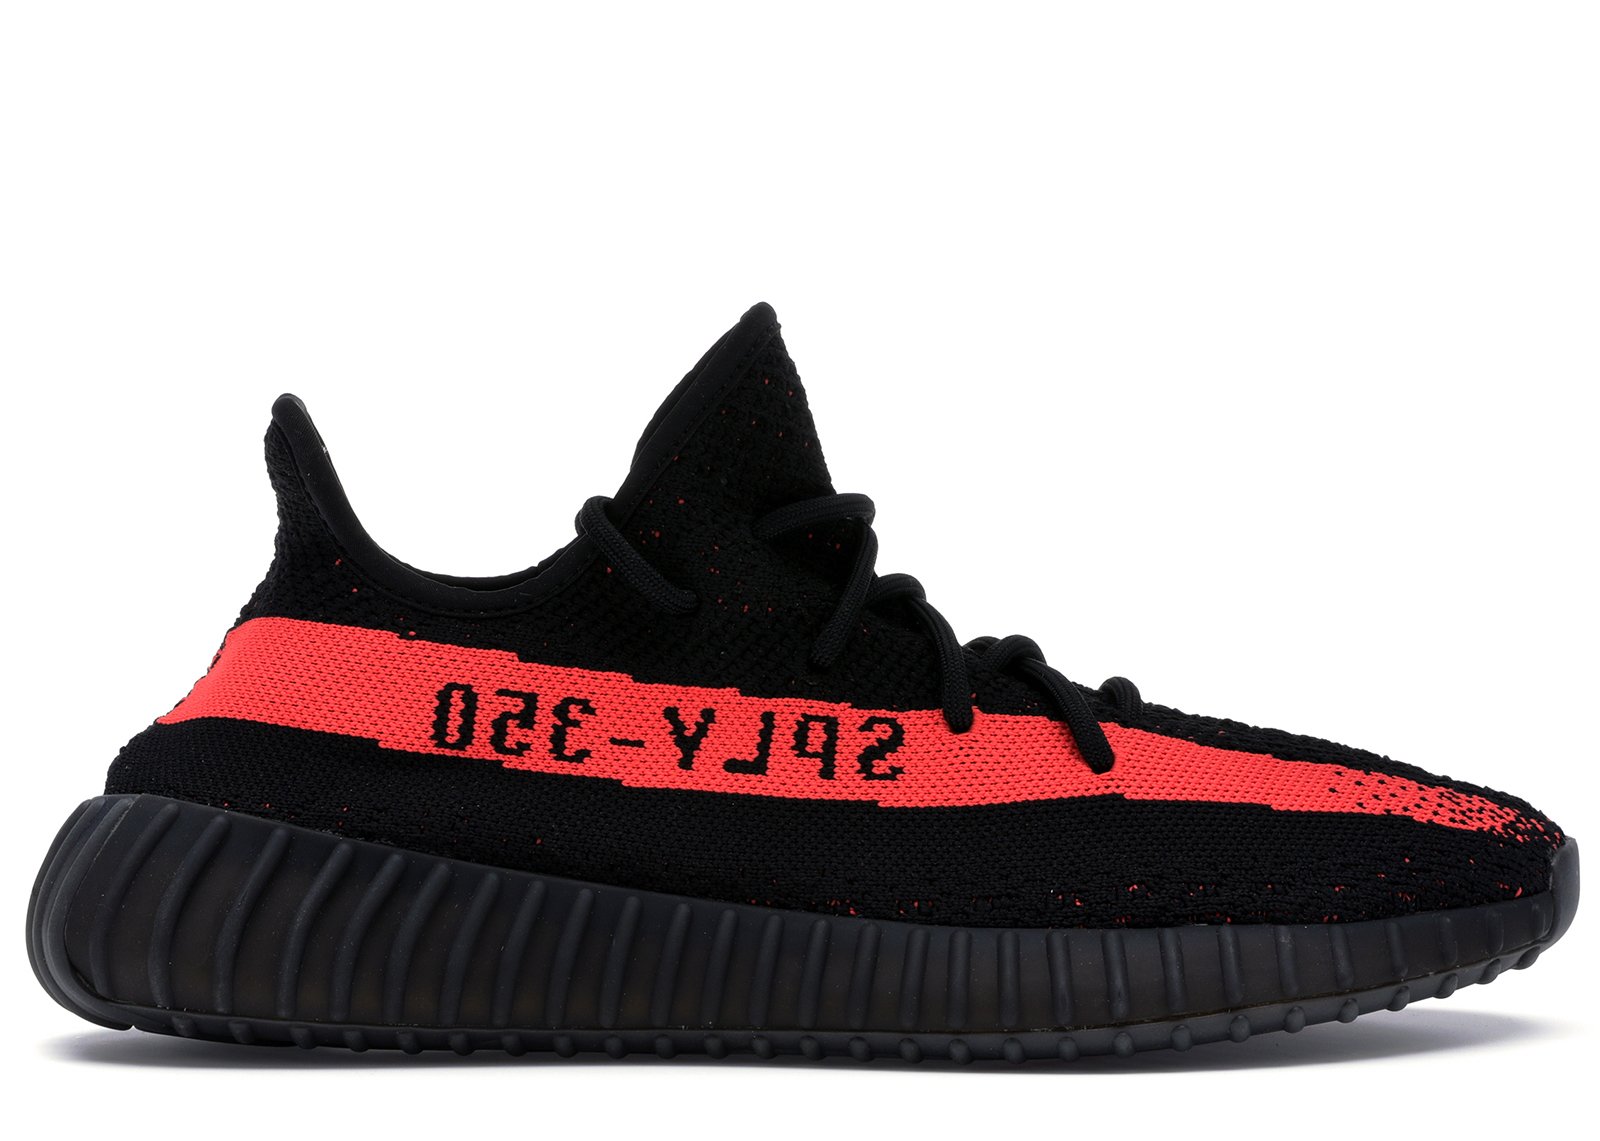 adidas Yeezy Boost 350 V2 Core Black Red sneakers